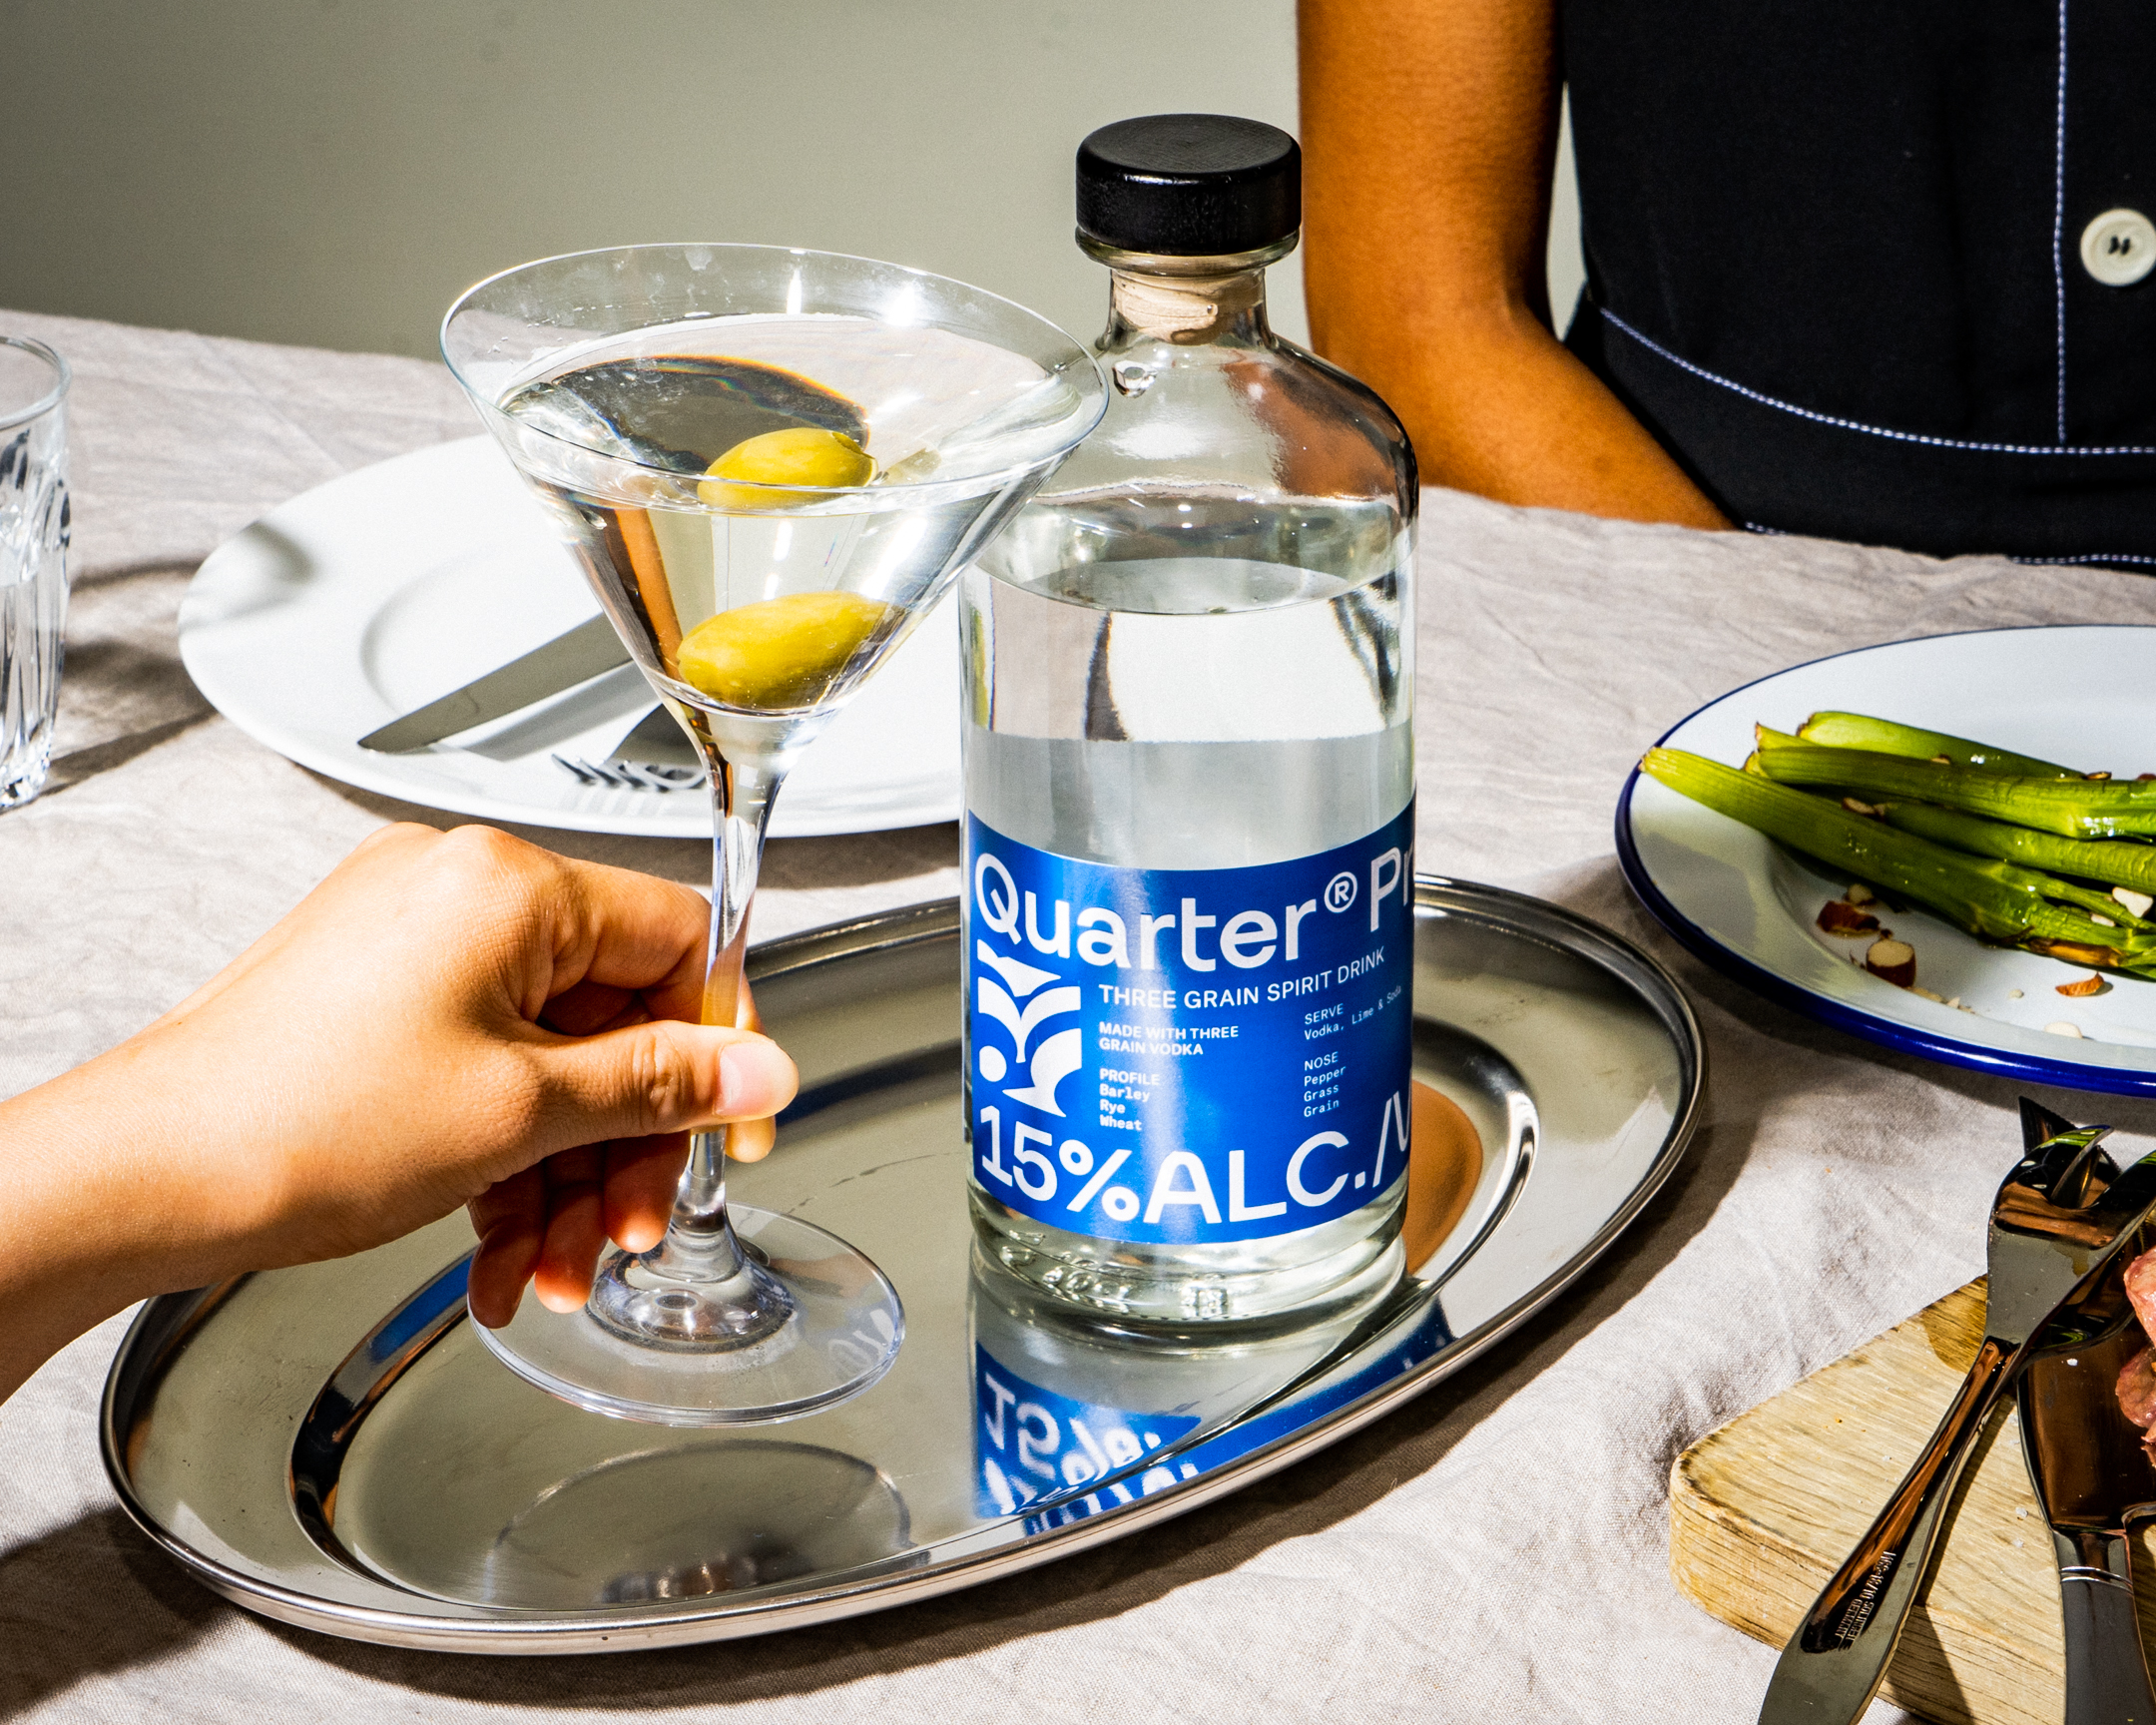 Quarter Proof’s Loud and Proud Design Turns Drinking Less Into a Real Party